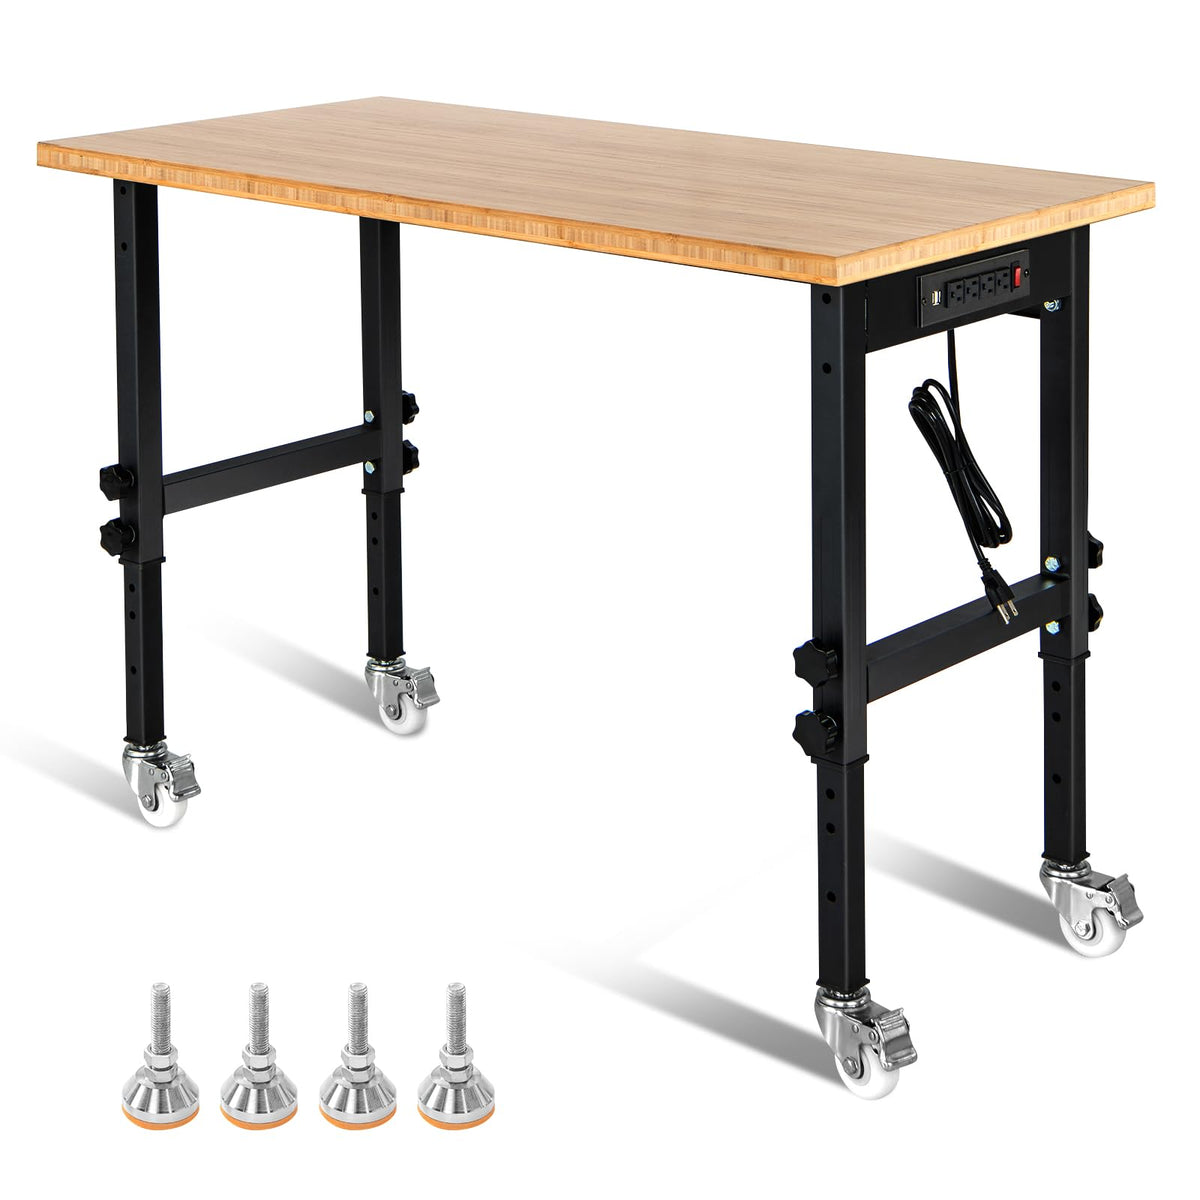 Goplus Work Bench with Power Outlet, 48”Adjustable Rolling Work Table w/Removable Wheels & Foot Pads, 1984LBS Capacity